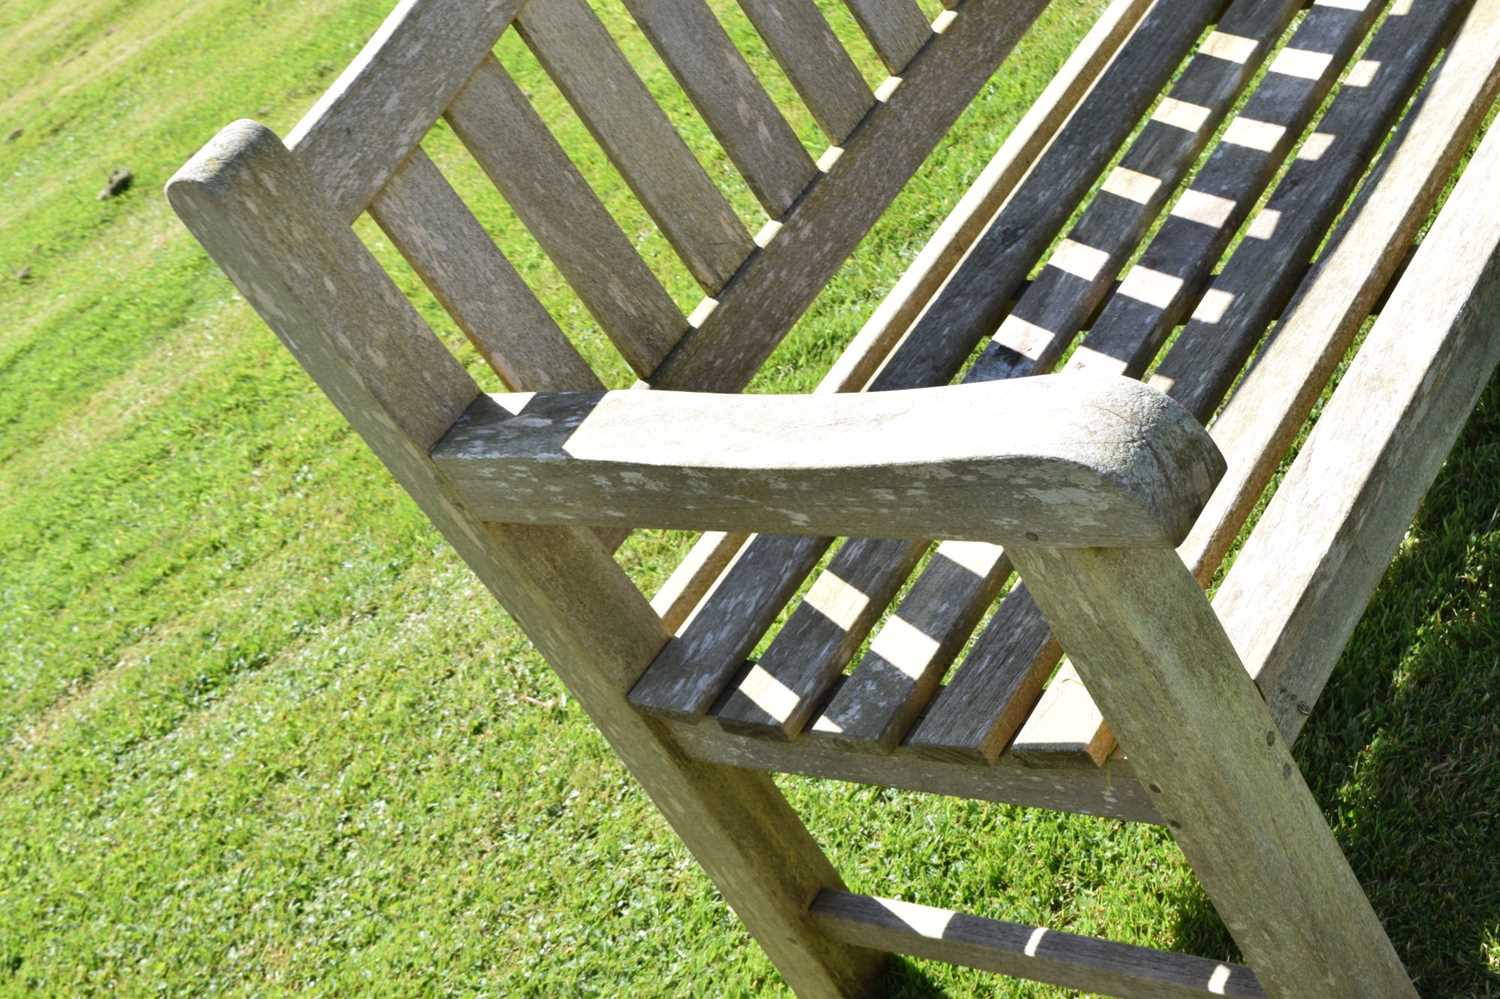 Two person teak garden bench with arched back - Image 3 of 6